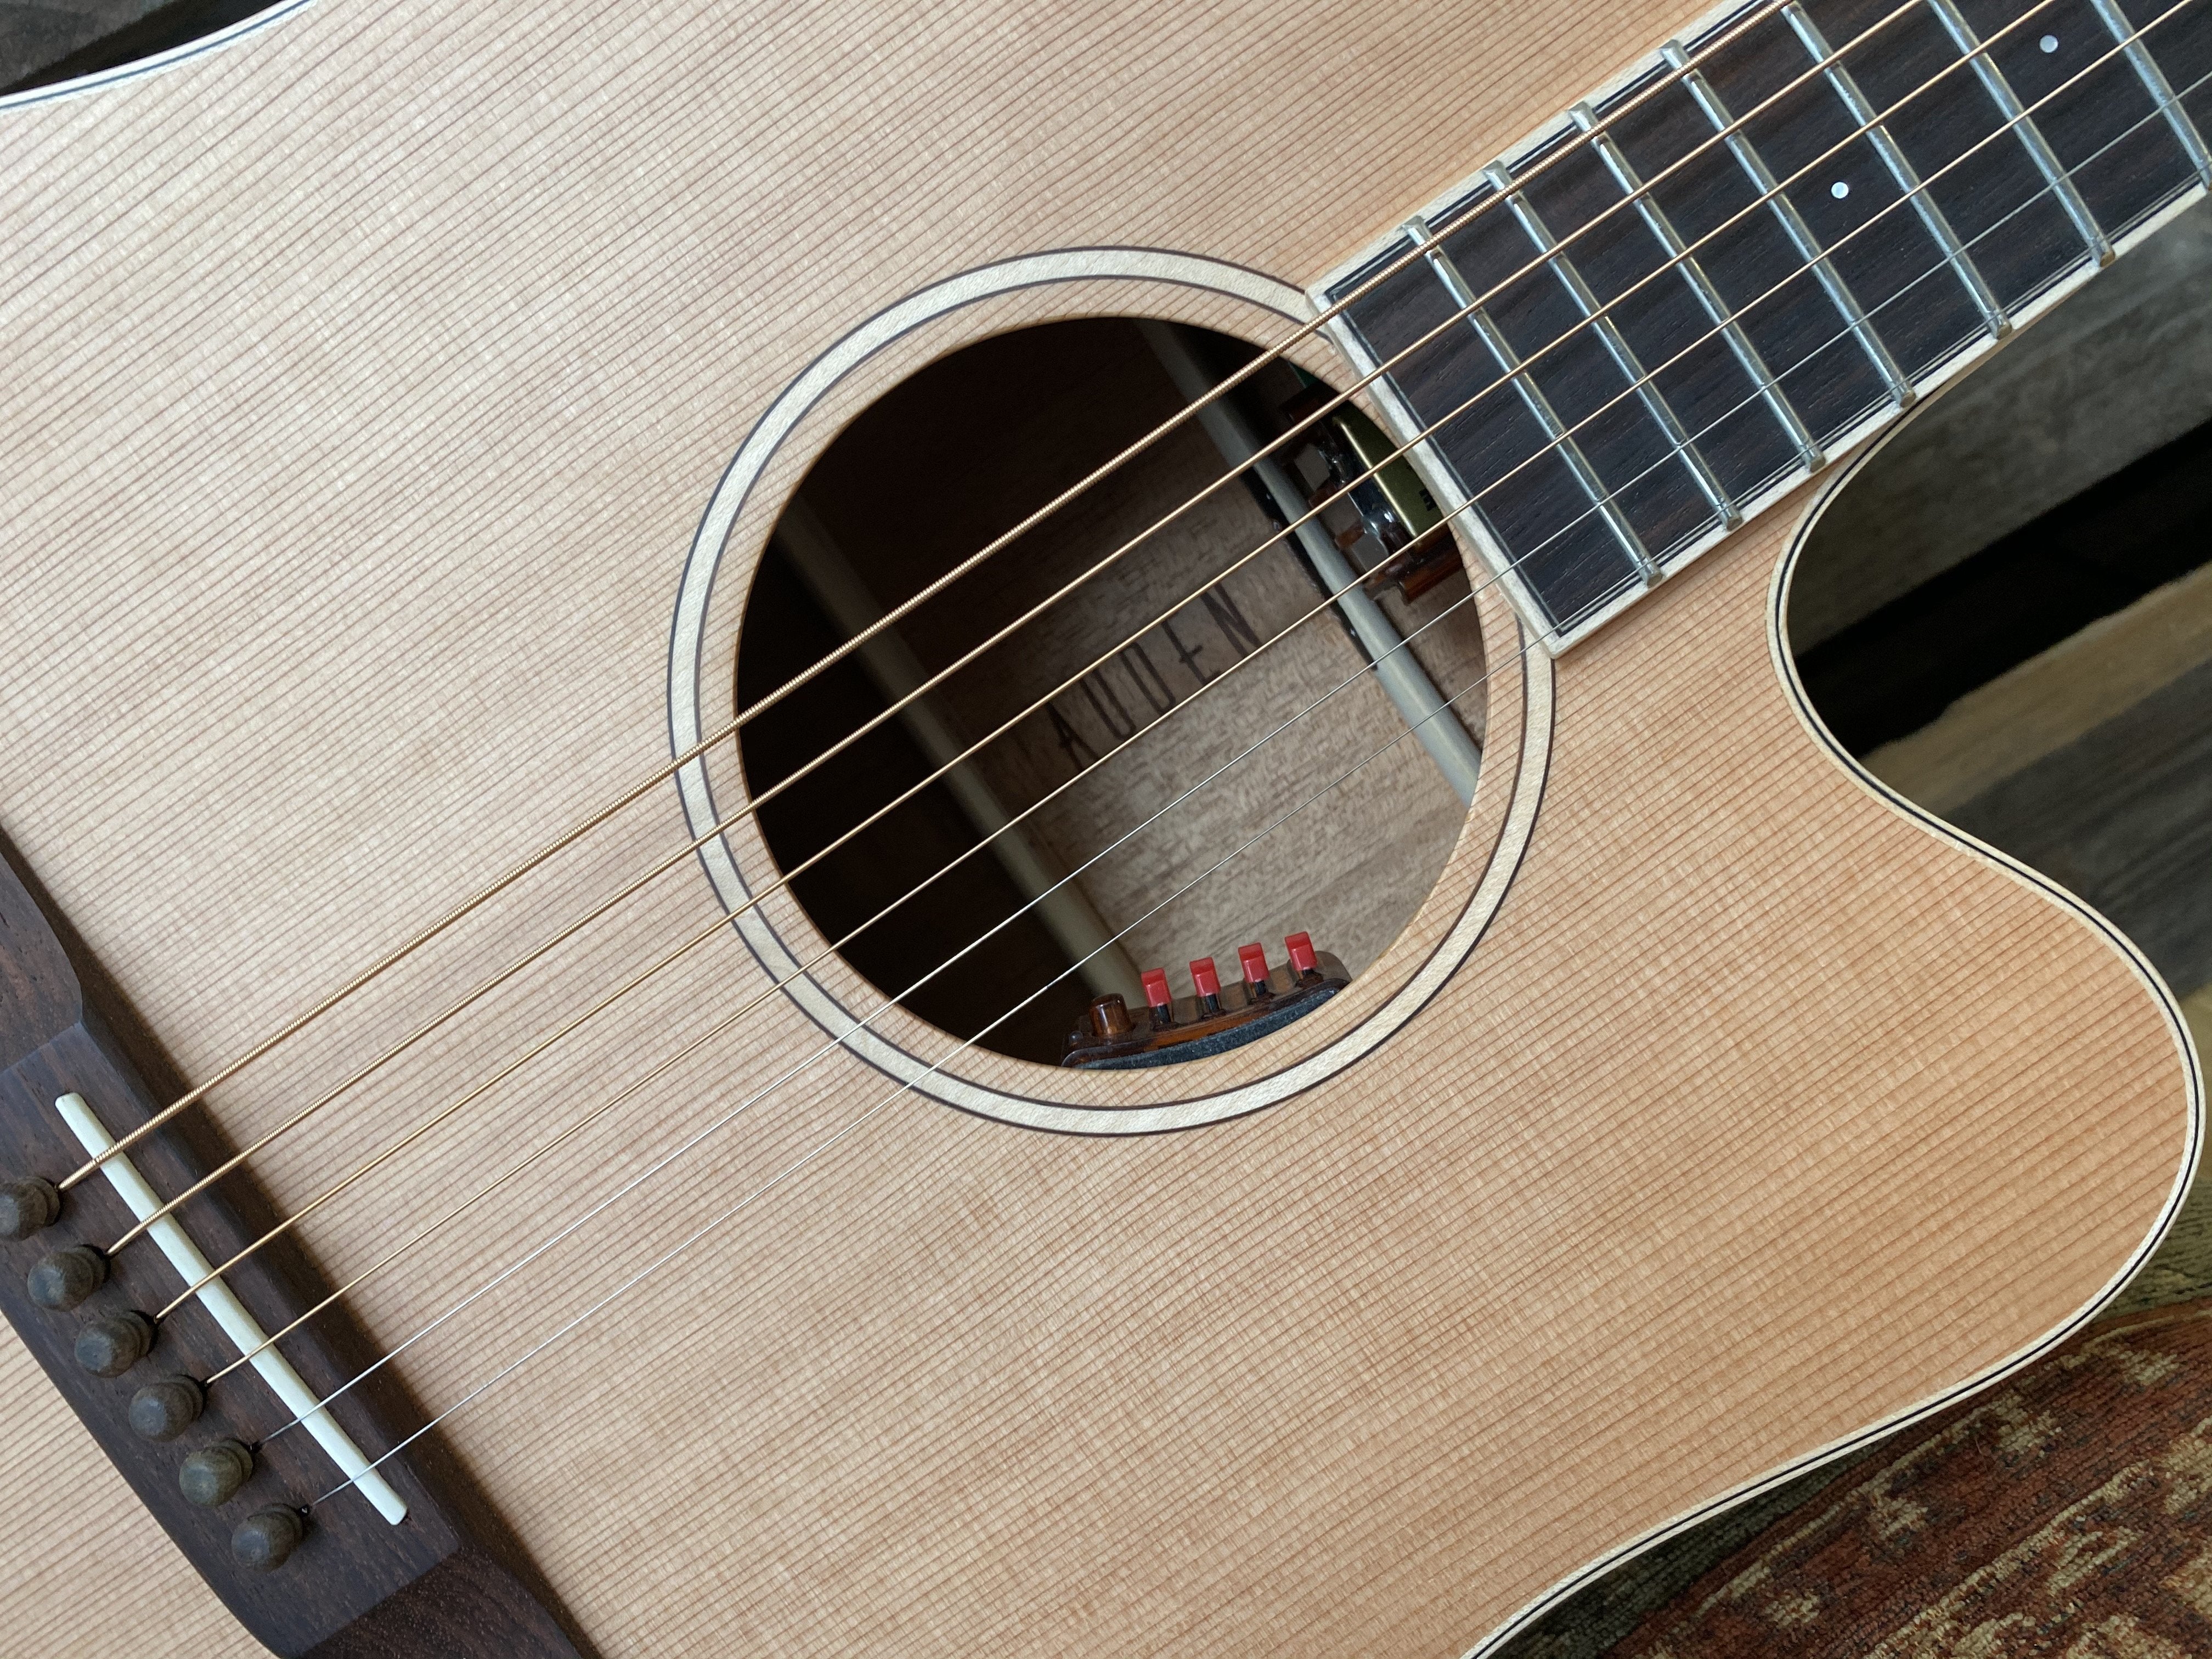 Auden Neo Colton Cutaway., Electro Acoustic Guitar for sale at Richards Guitars.